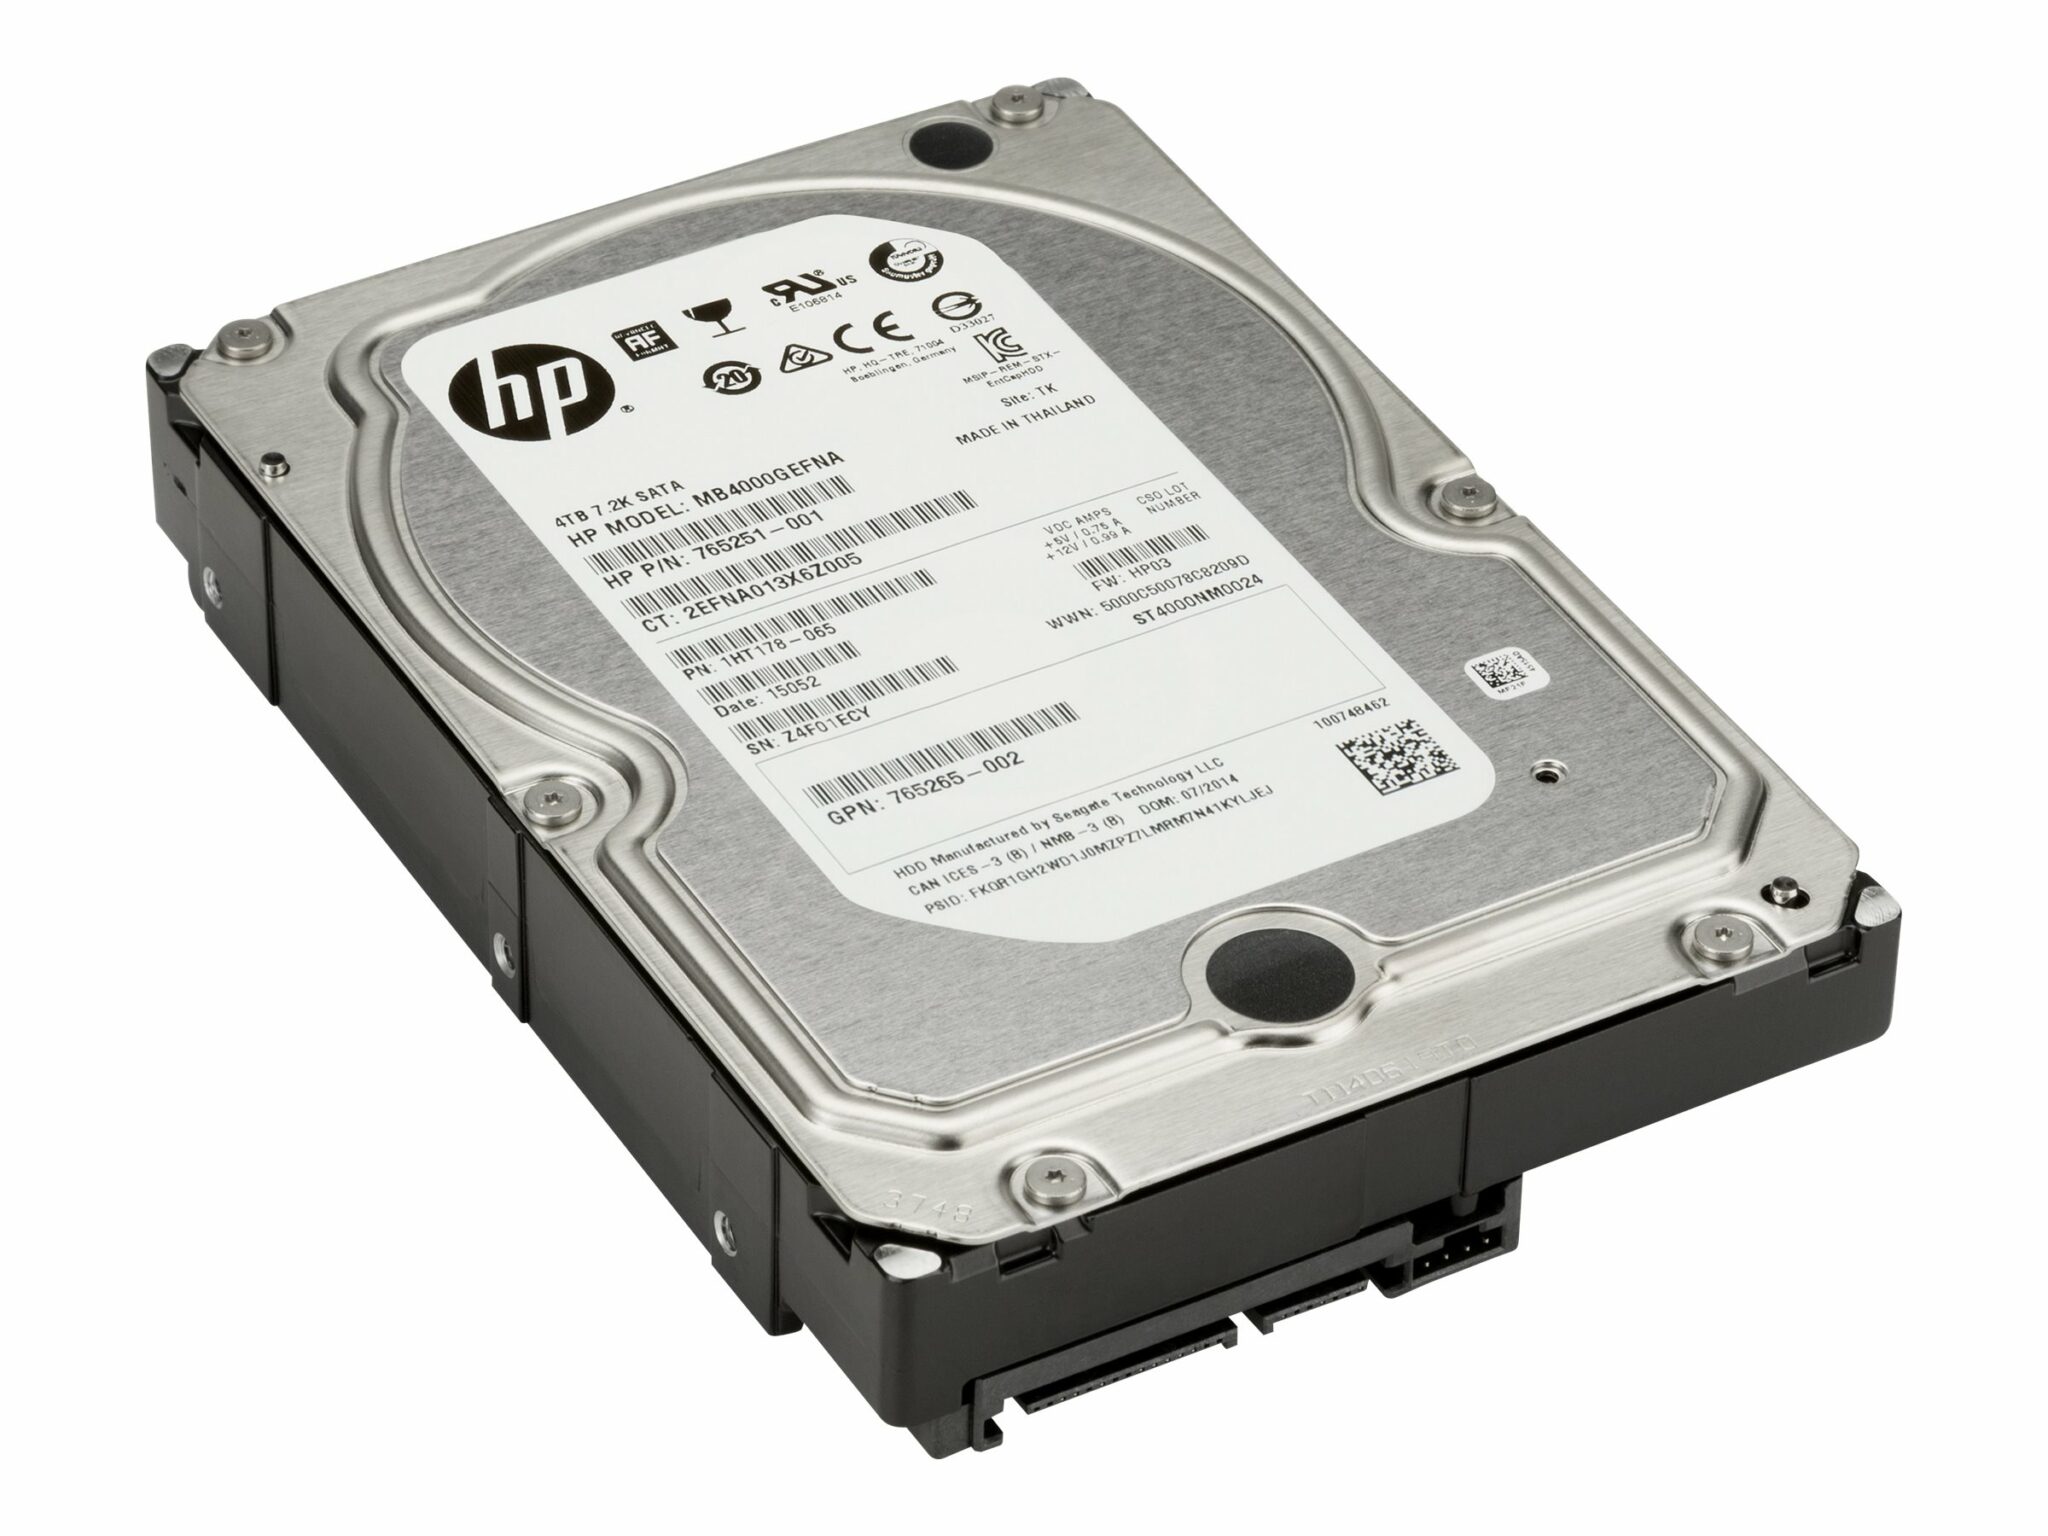 HP - disque dur - 4 To - SATA 6Gb/s (K4T76AA)